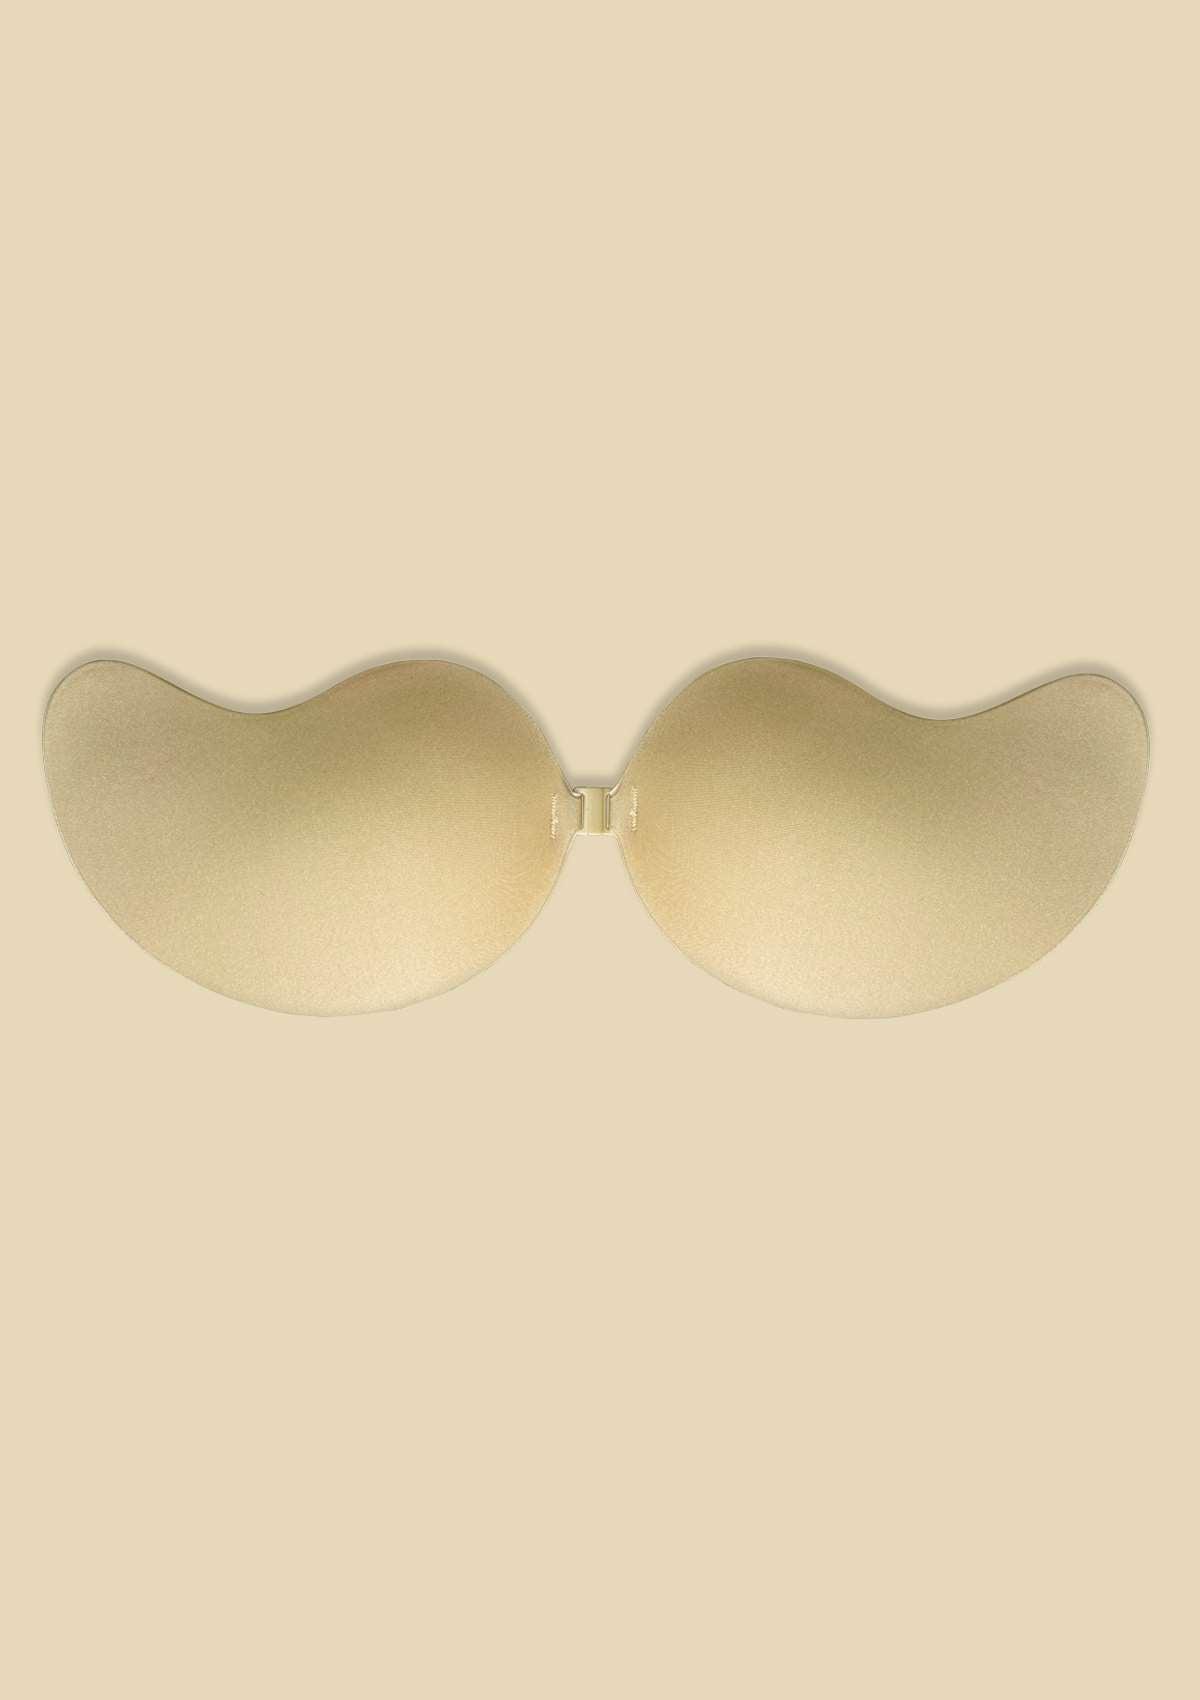 HSIA Strapless Backless Adhesive Sticky Bra  - 34D / Beige